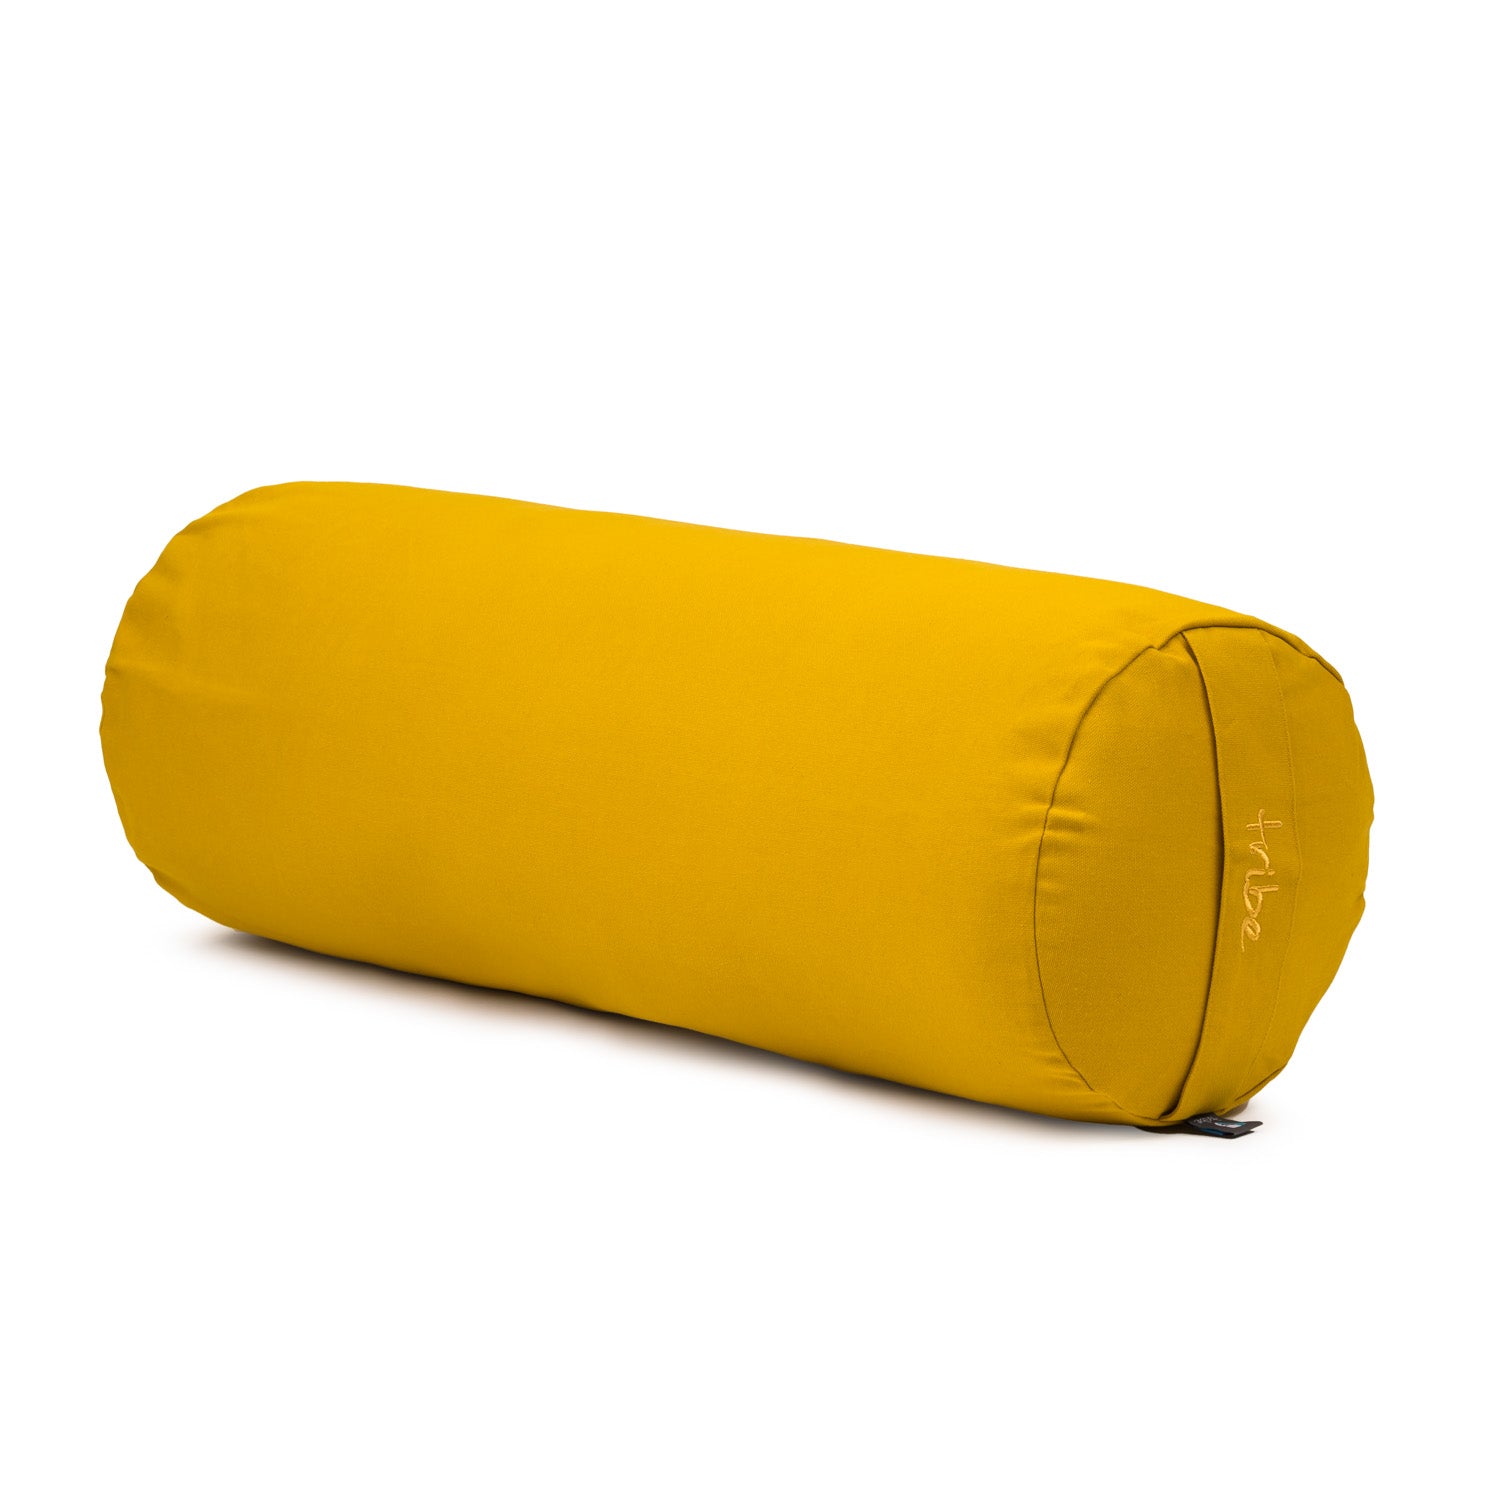 Round Bolster - Organic Cotton Cover - Gold - 45 degrees angle | TRIBE Yoga